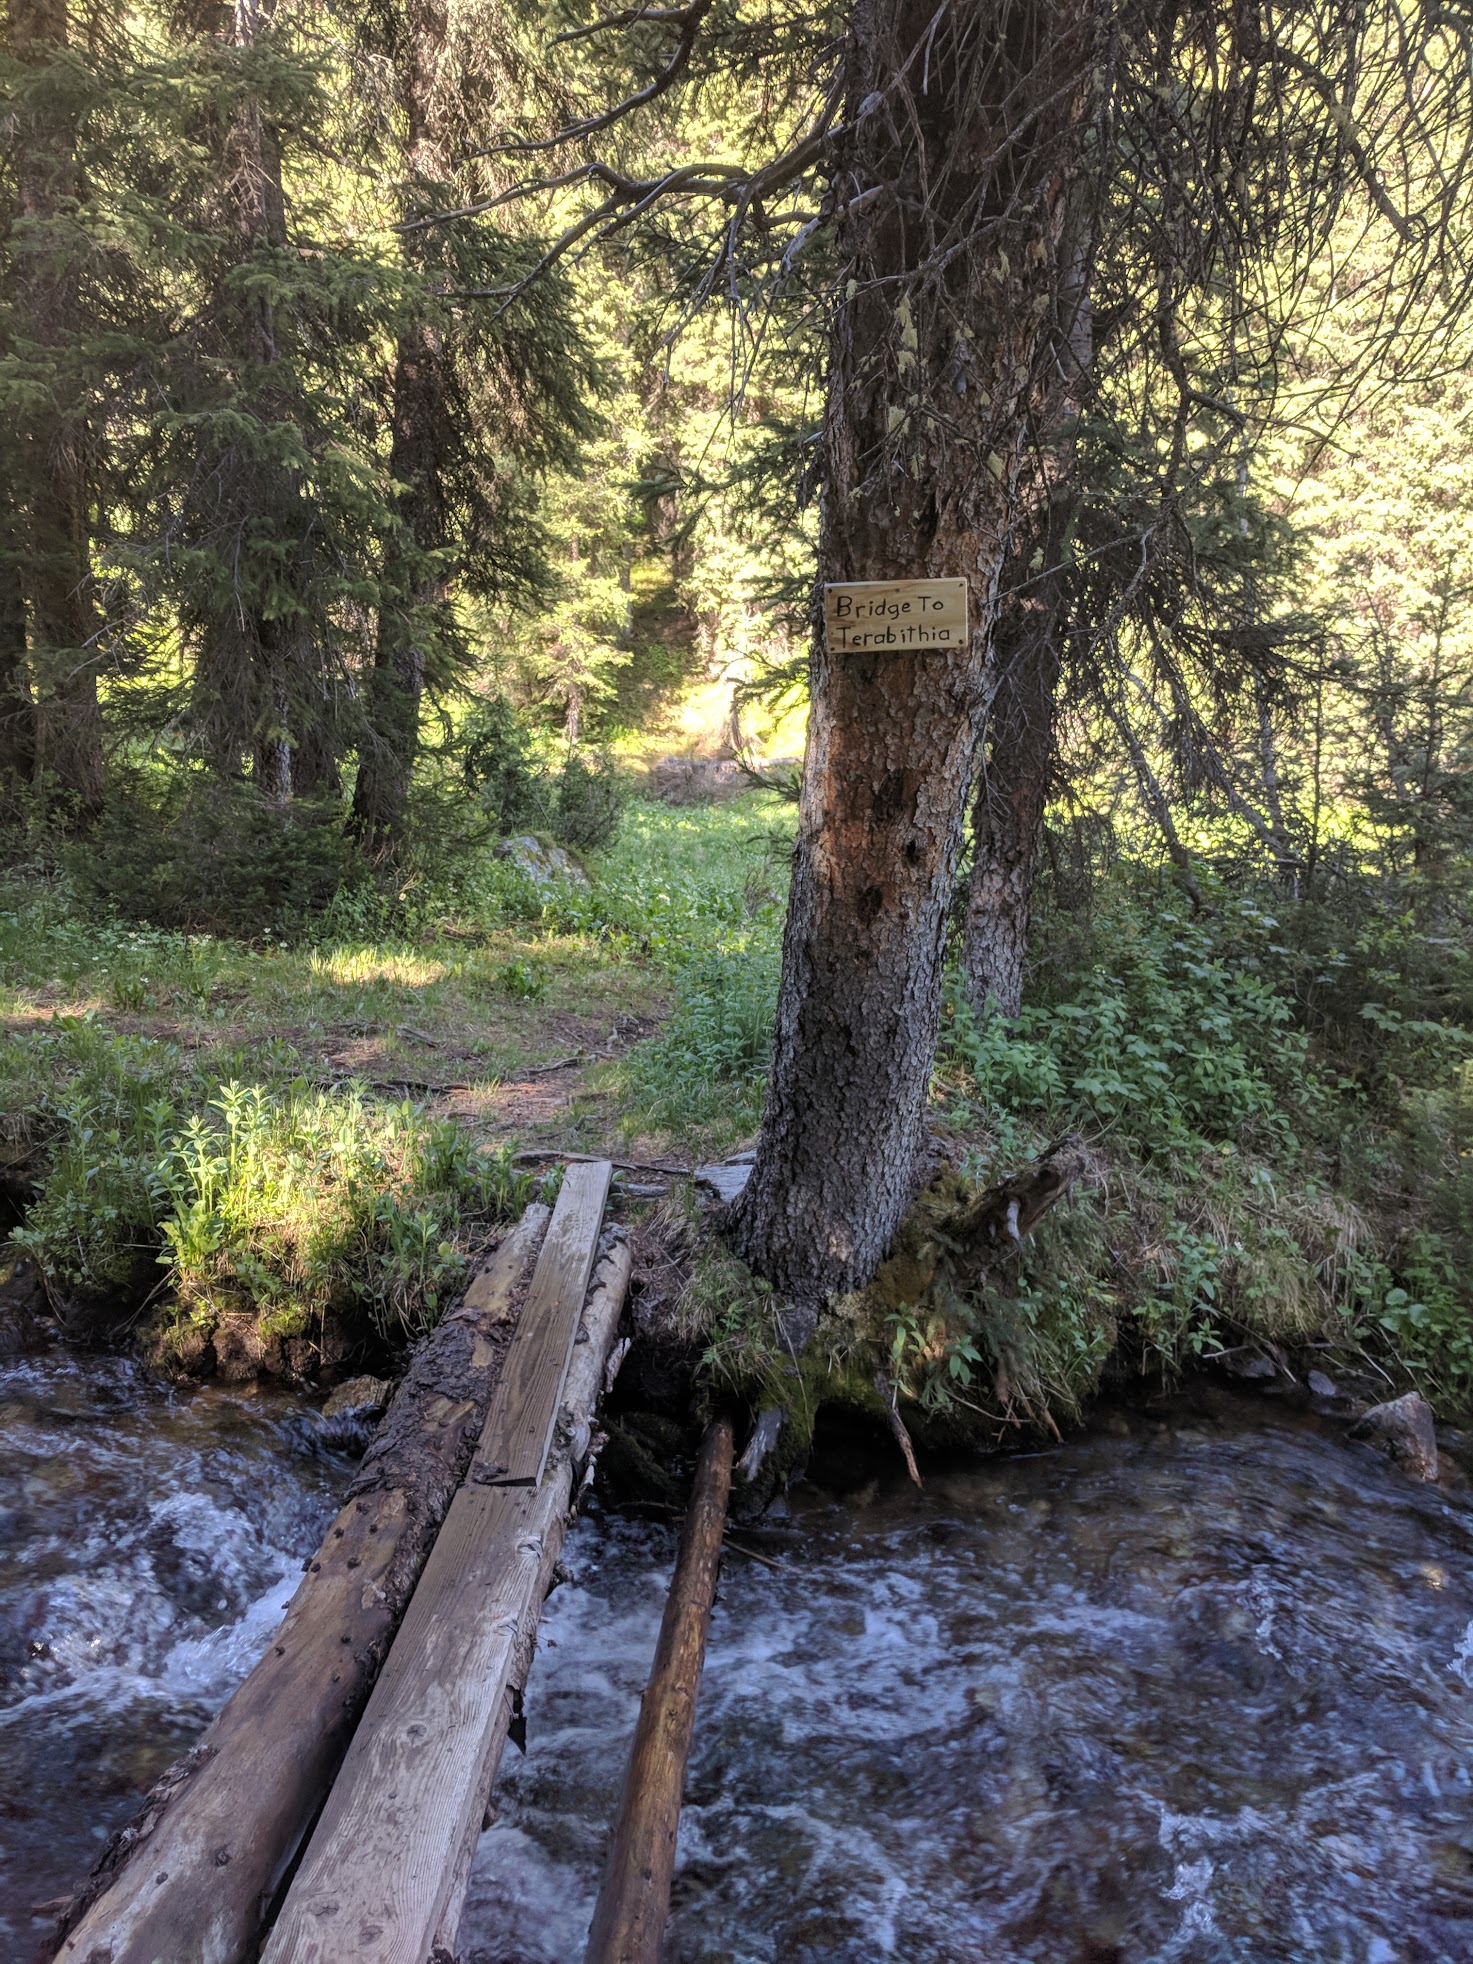 Just to the west of the road at the creek crossing is a small foot bridge with the signage 'Bridge to Terabithia'...saved us from the creek crossings.